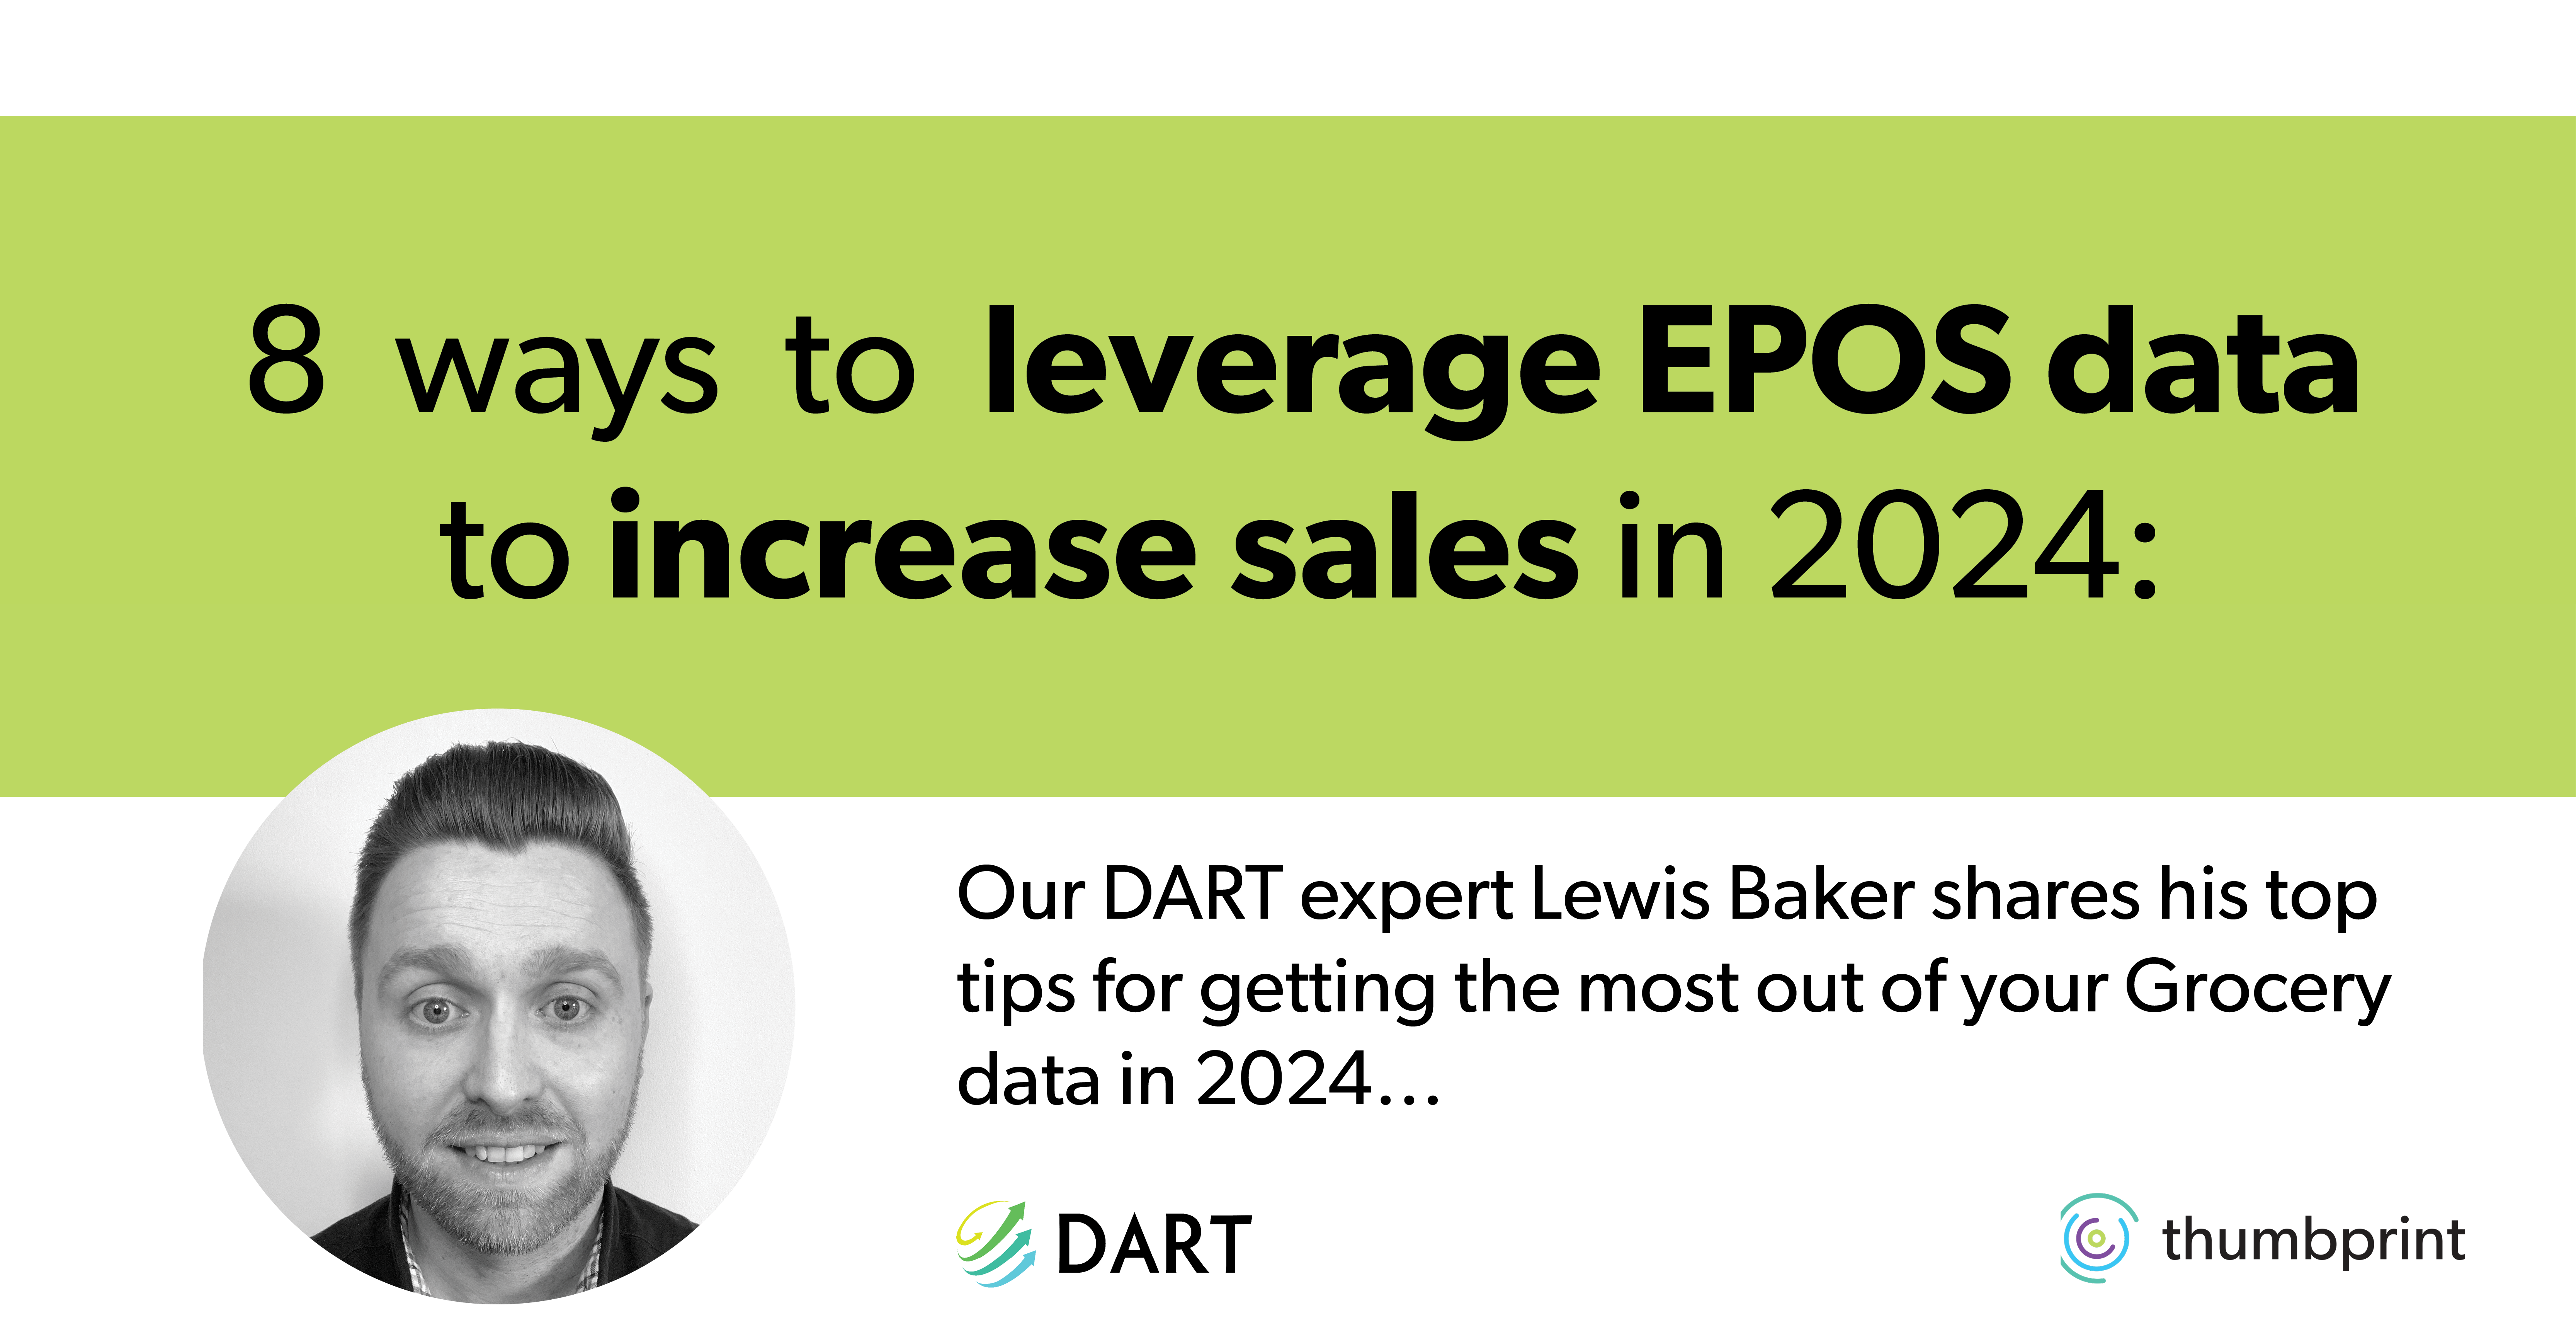 8 ways to leverage EPOS data to increase sales in 2024, from store level to national account level